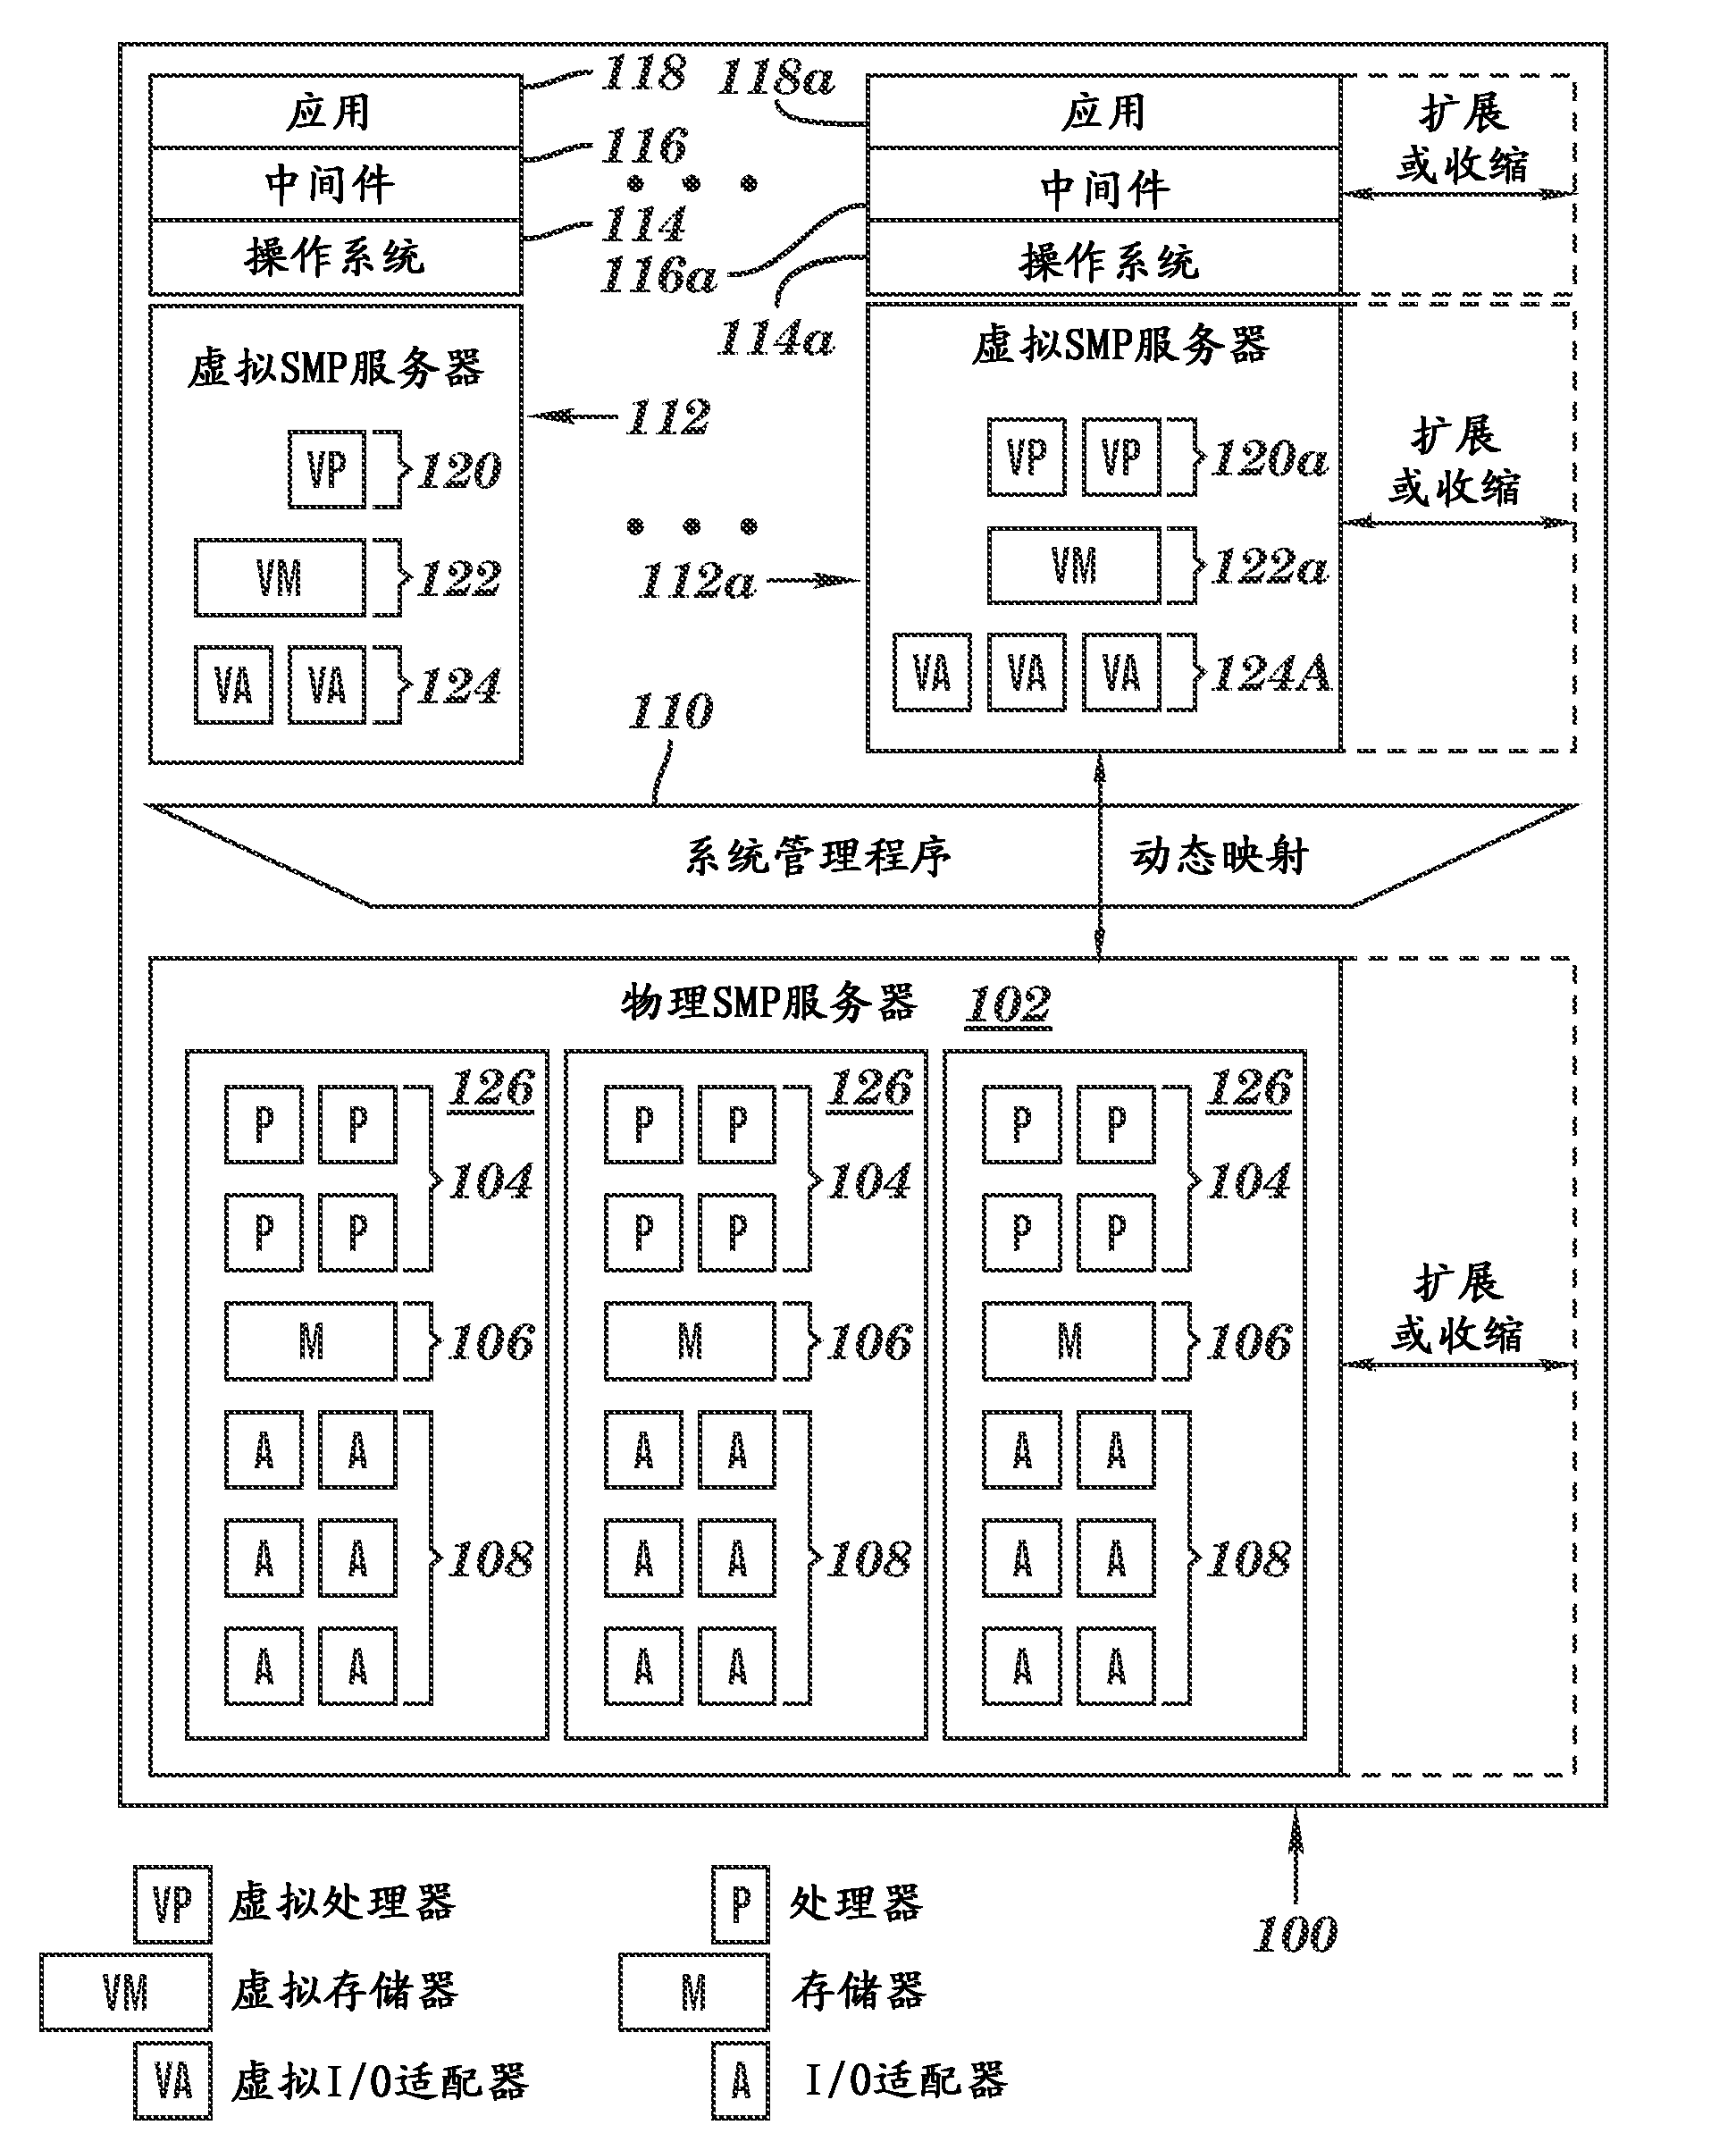 Power management in a multi-processor computer system